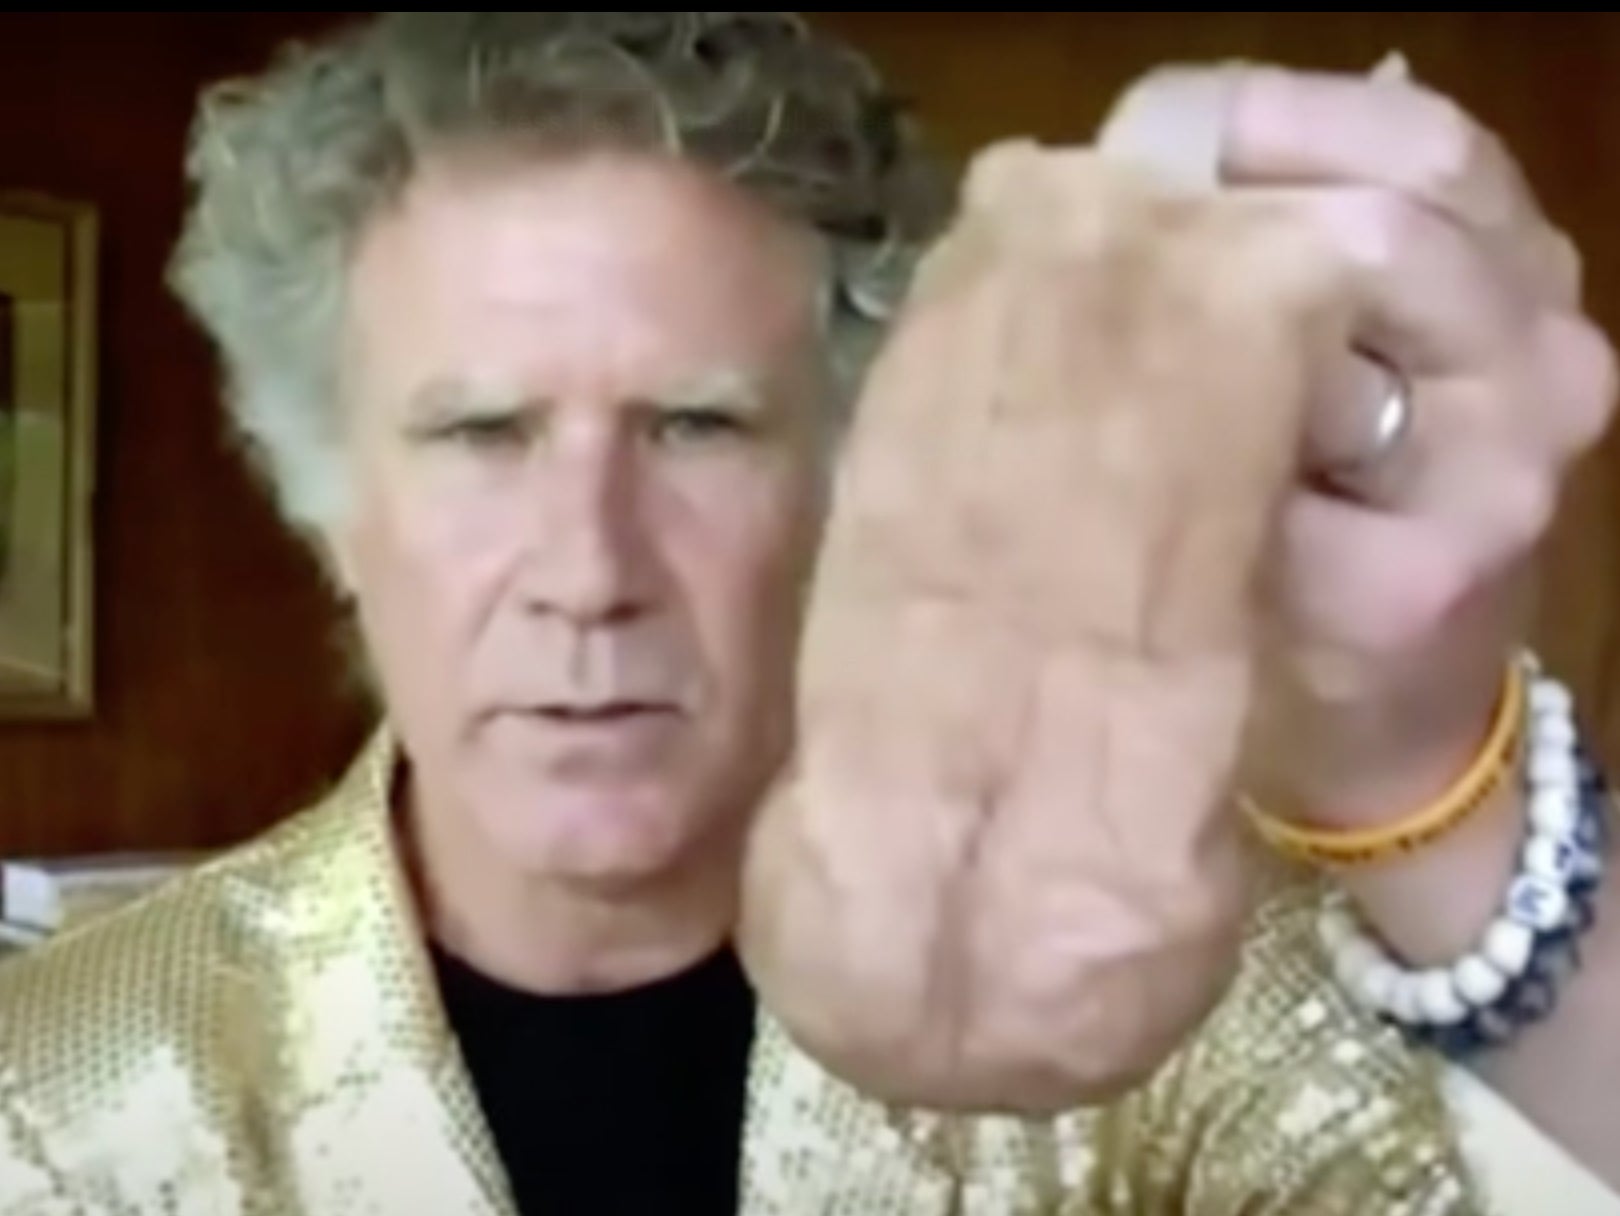 Will Ferrell with the prosthetic testicles from ‘Step Brothers’